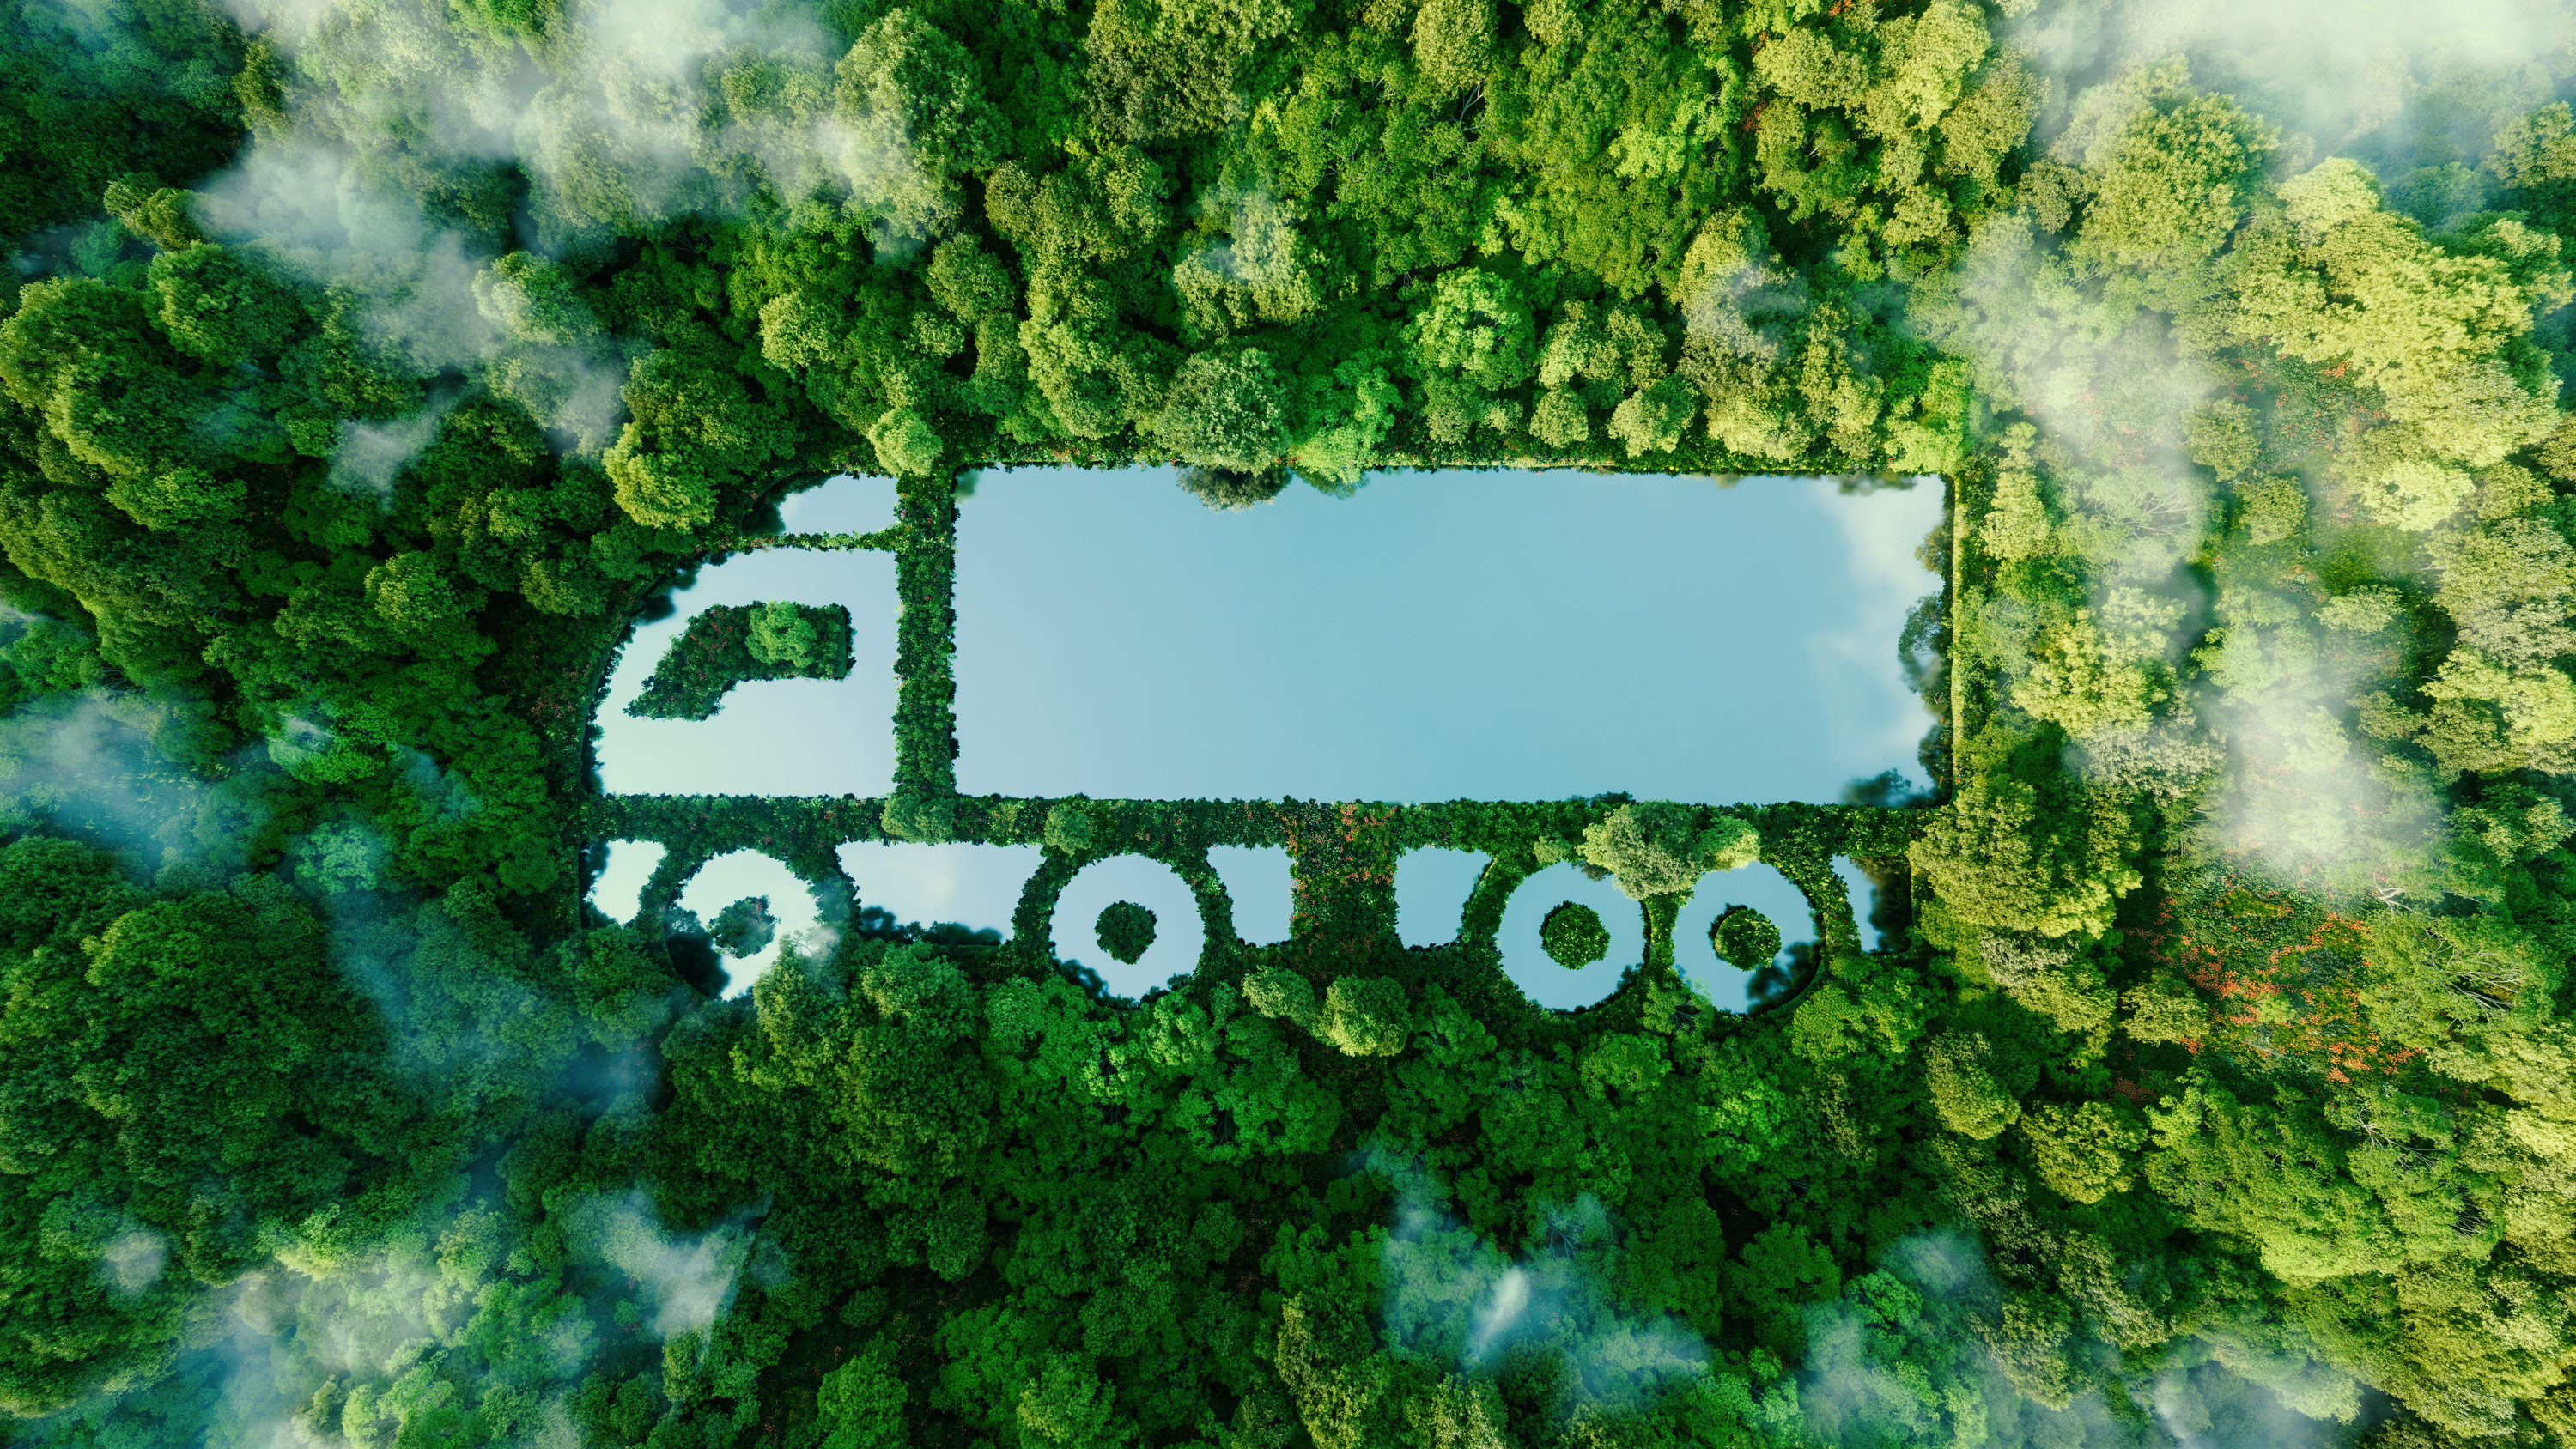 Truck outline in the forest